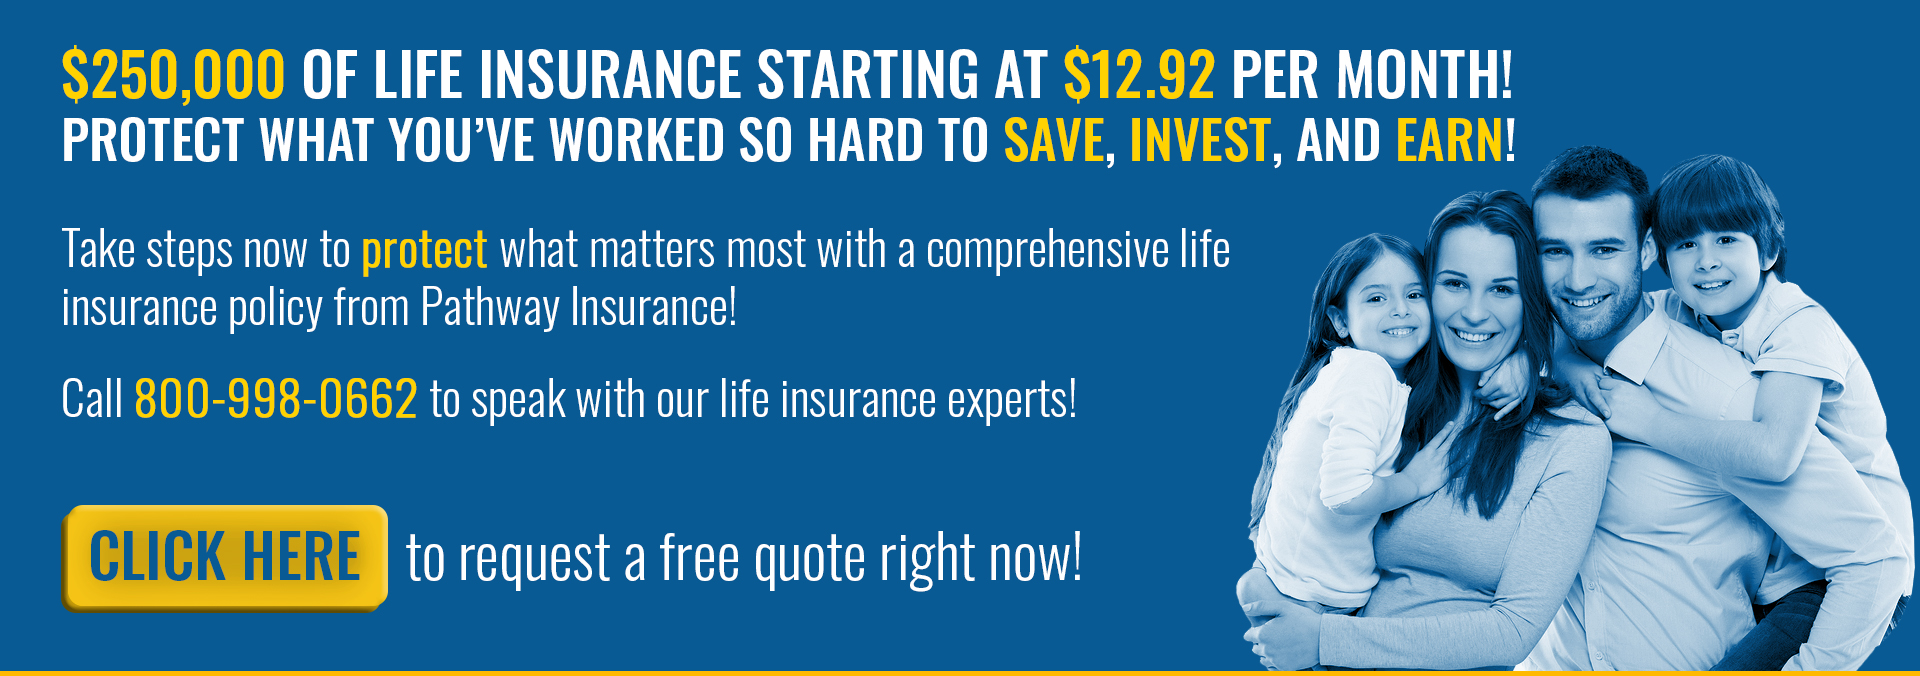 Life Insurance Ohio - Life insurance starting at $12.92 per month. click here to request a free quote right now.